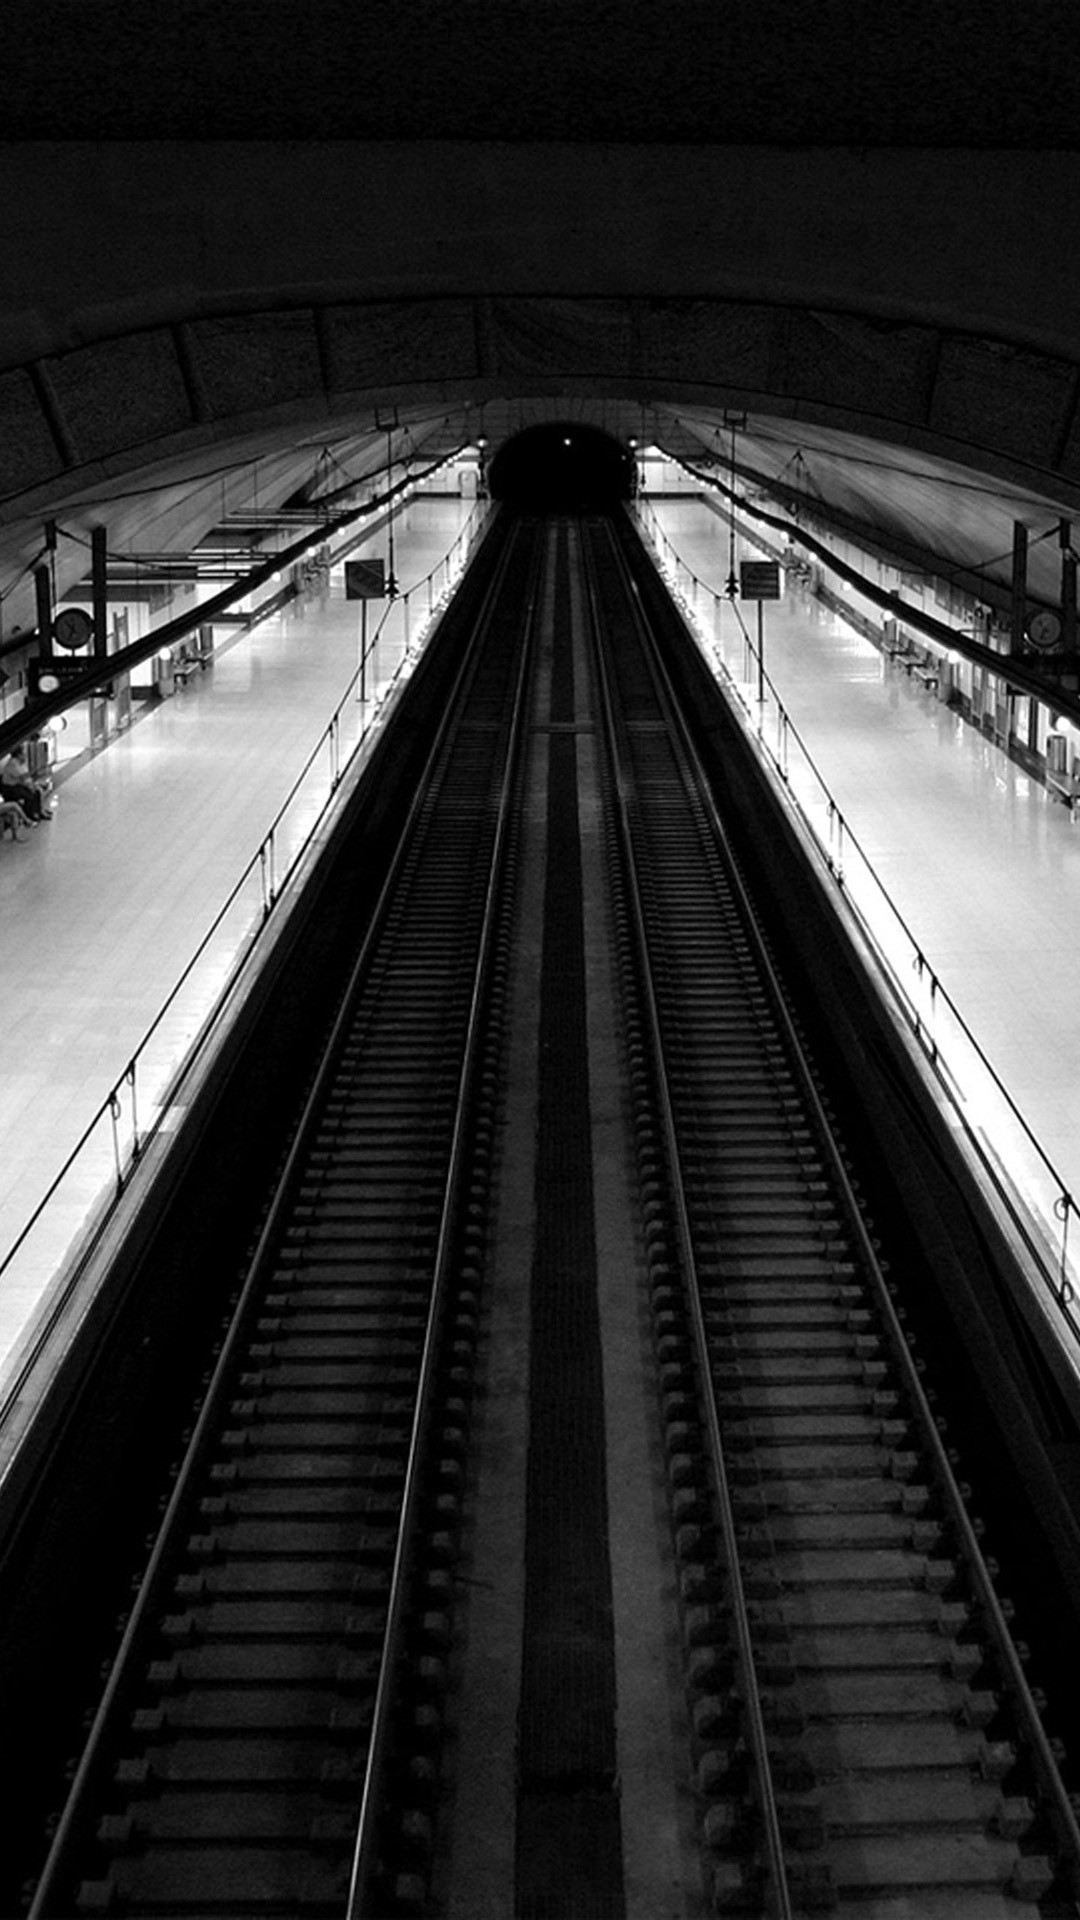 1080x1920 ... Madrid Subway Black And White Top View iPhone 7 Plus HD Wallpaper ...